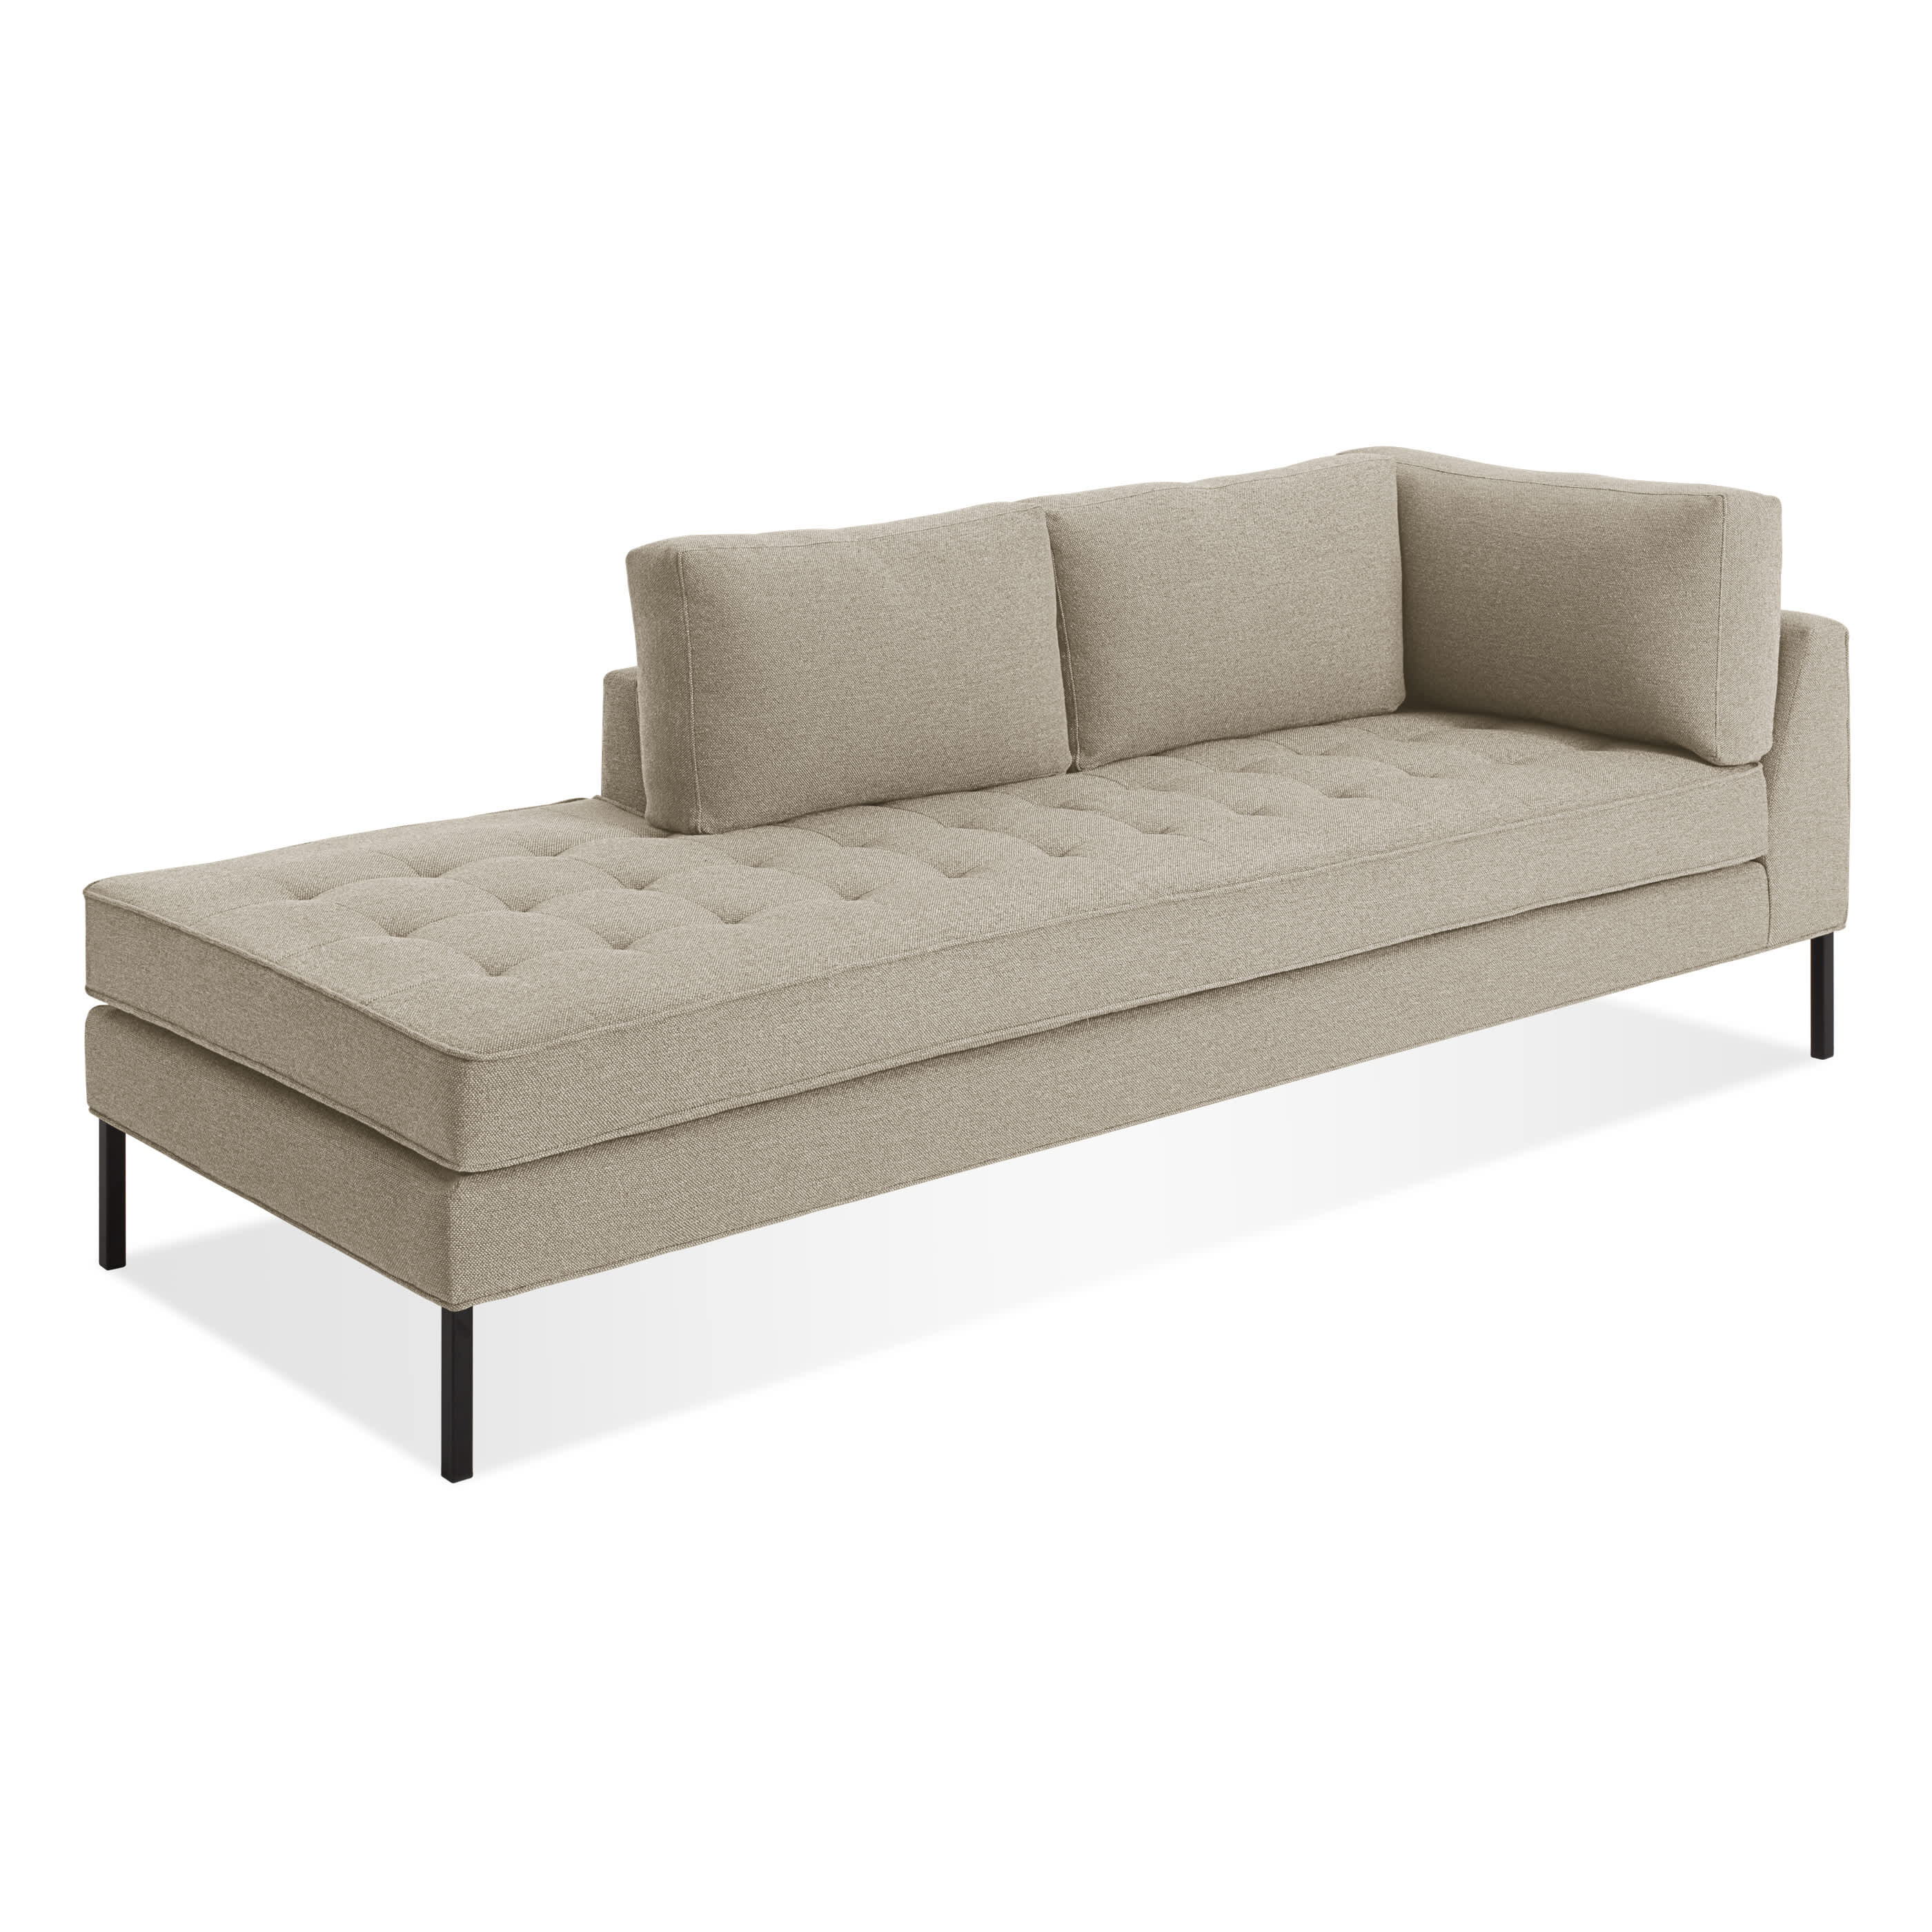 Paramount Tufted Chaise Lounge